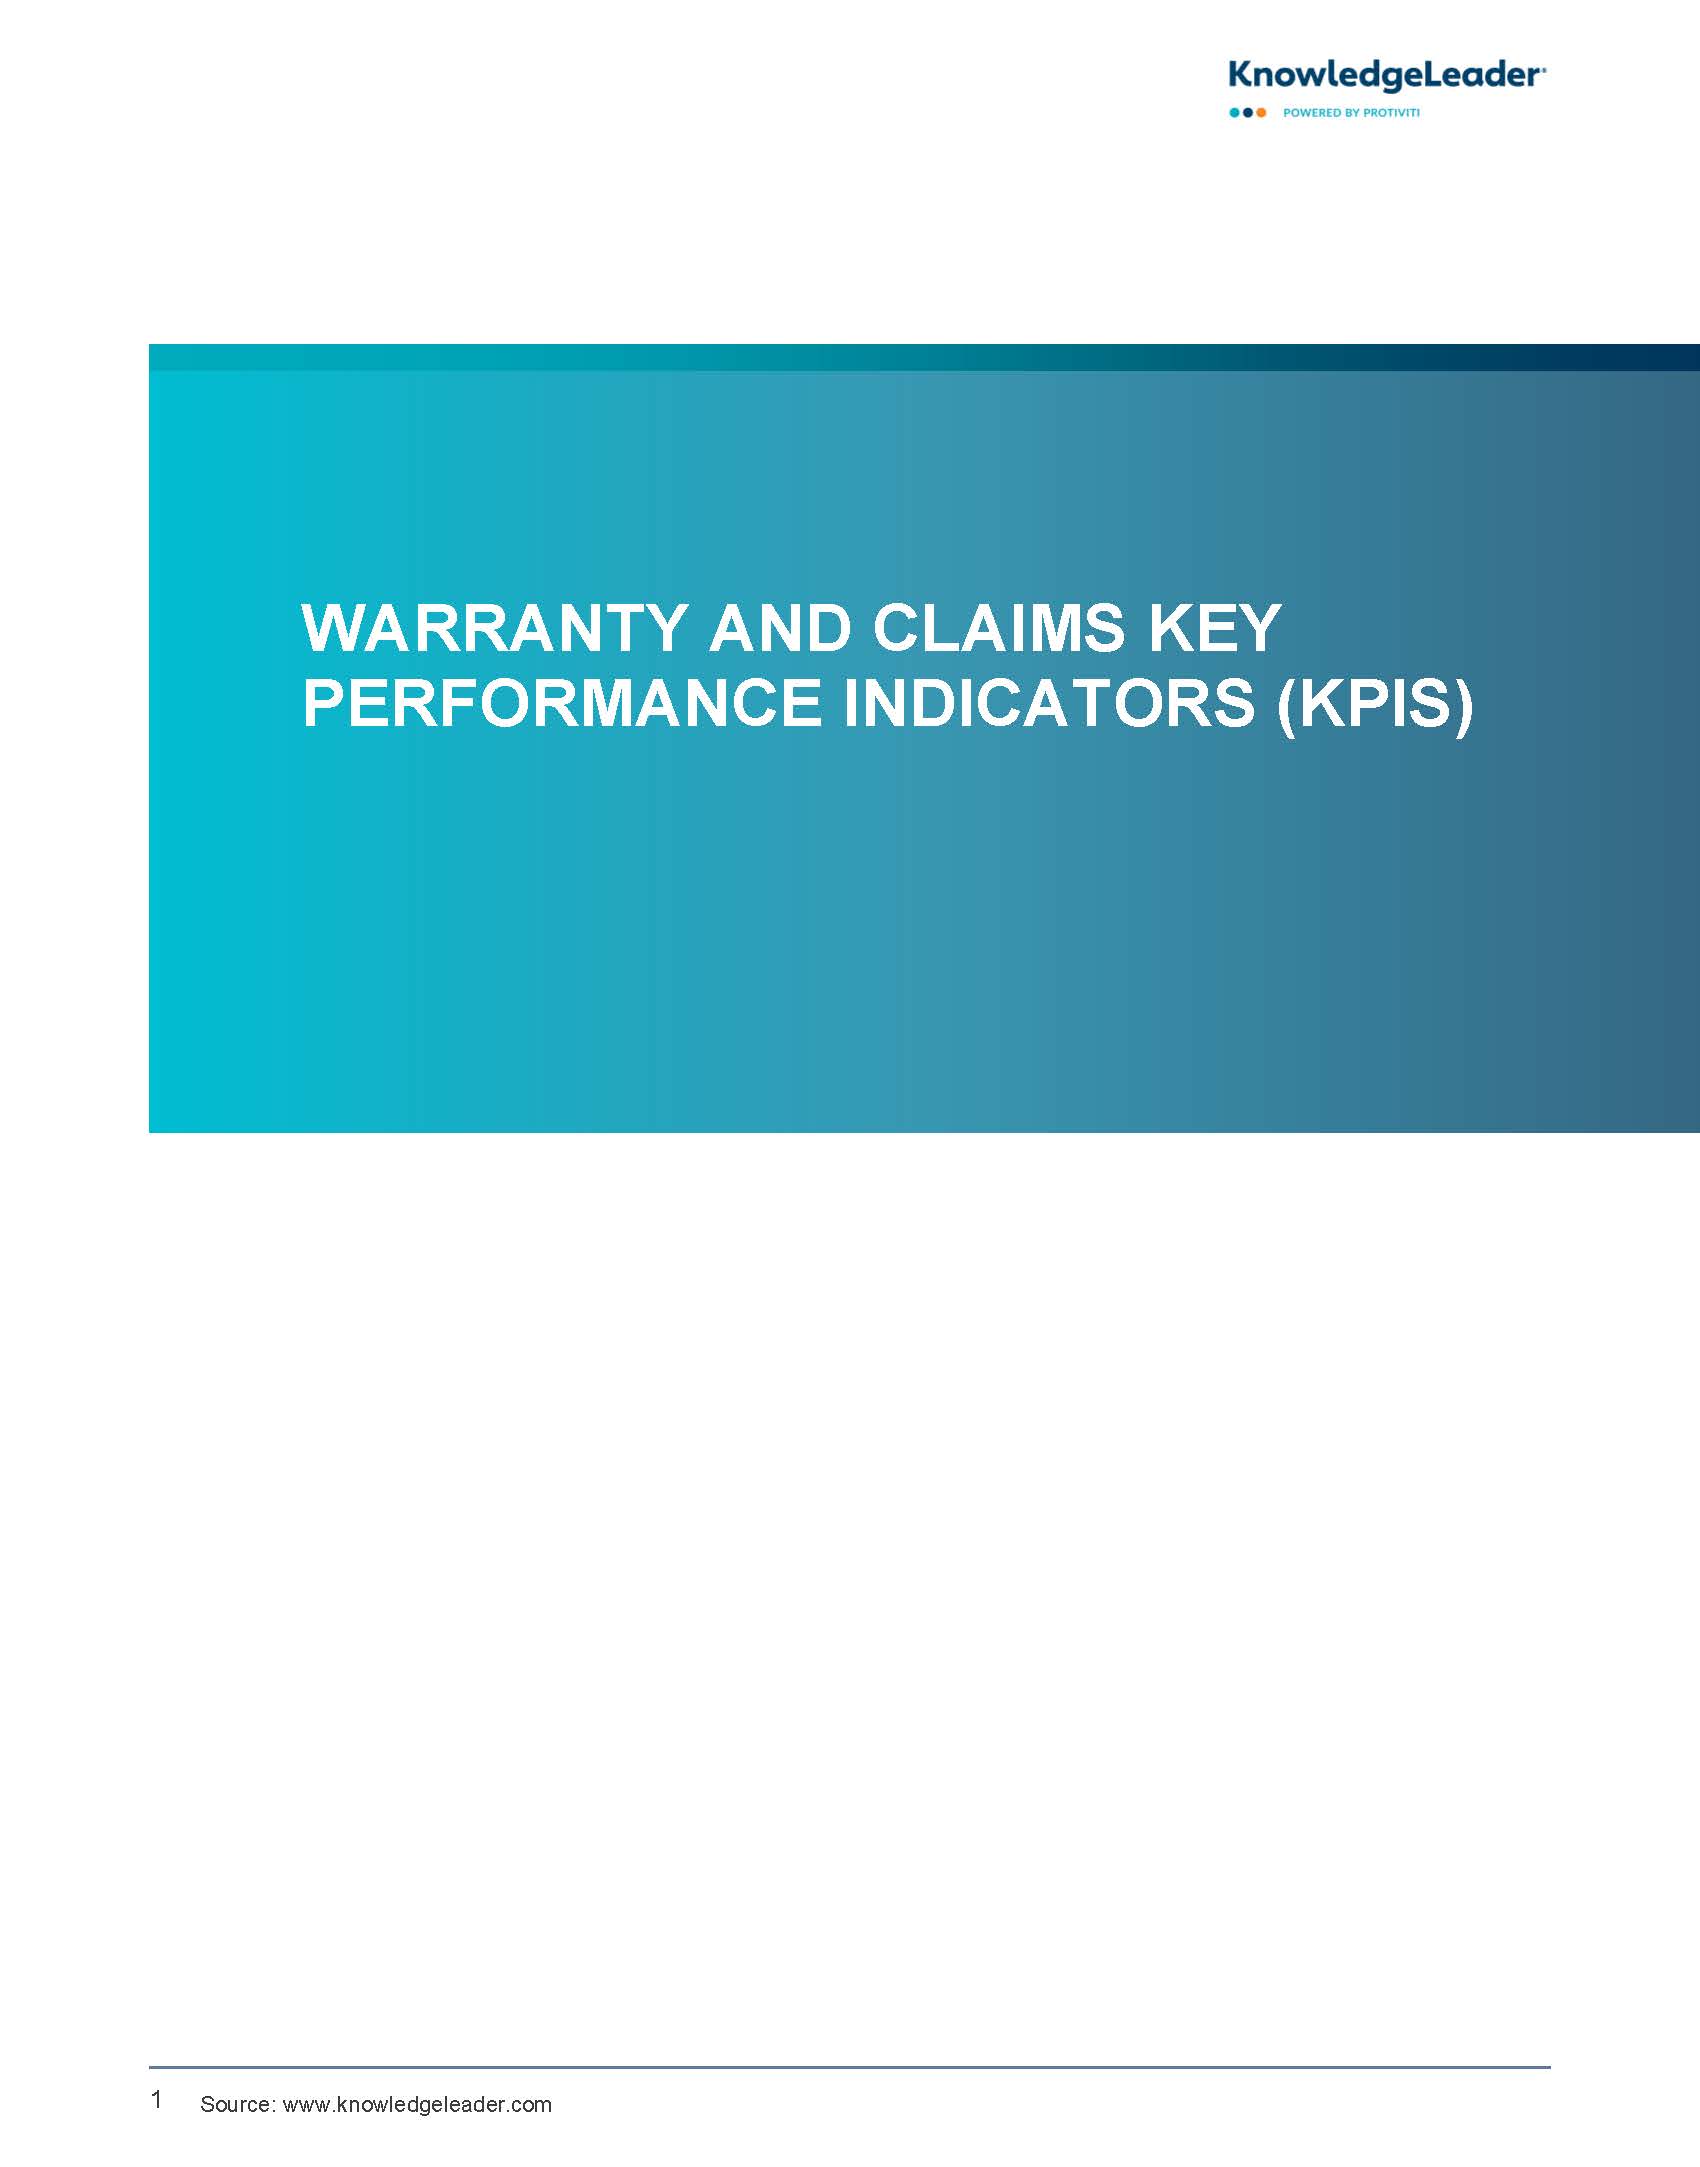 Screenshot of the first page of Warranty and Claims Key Performance Indicators (KPIs)